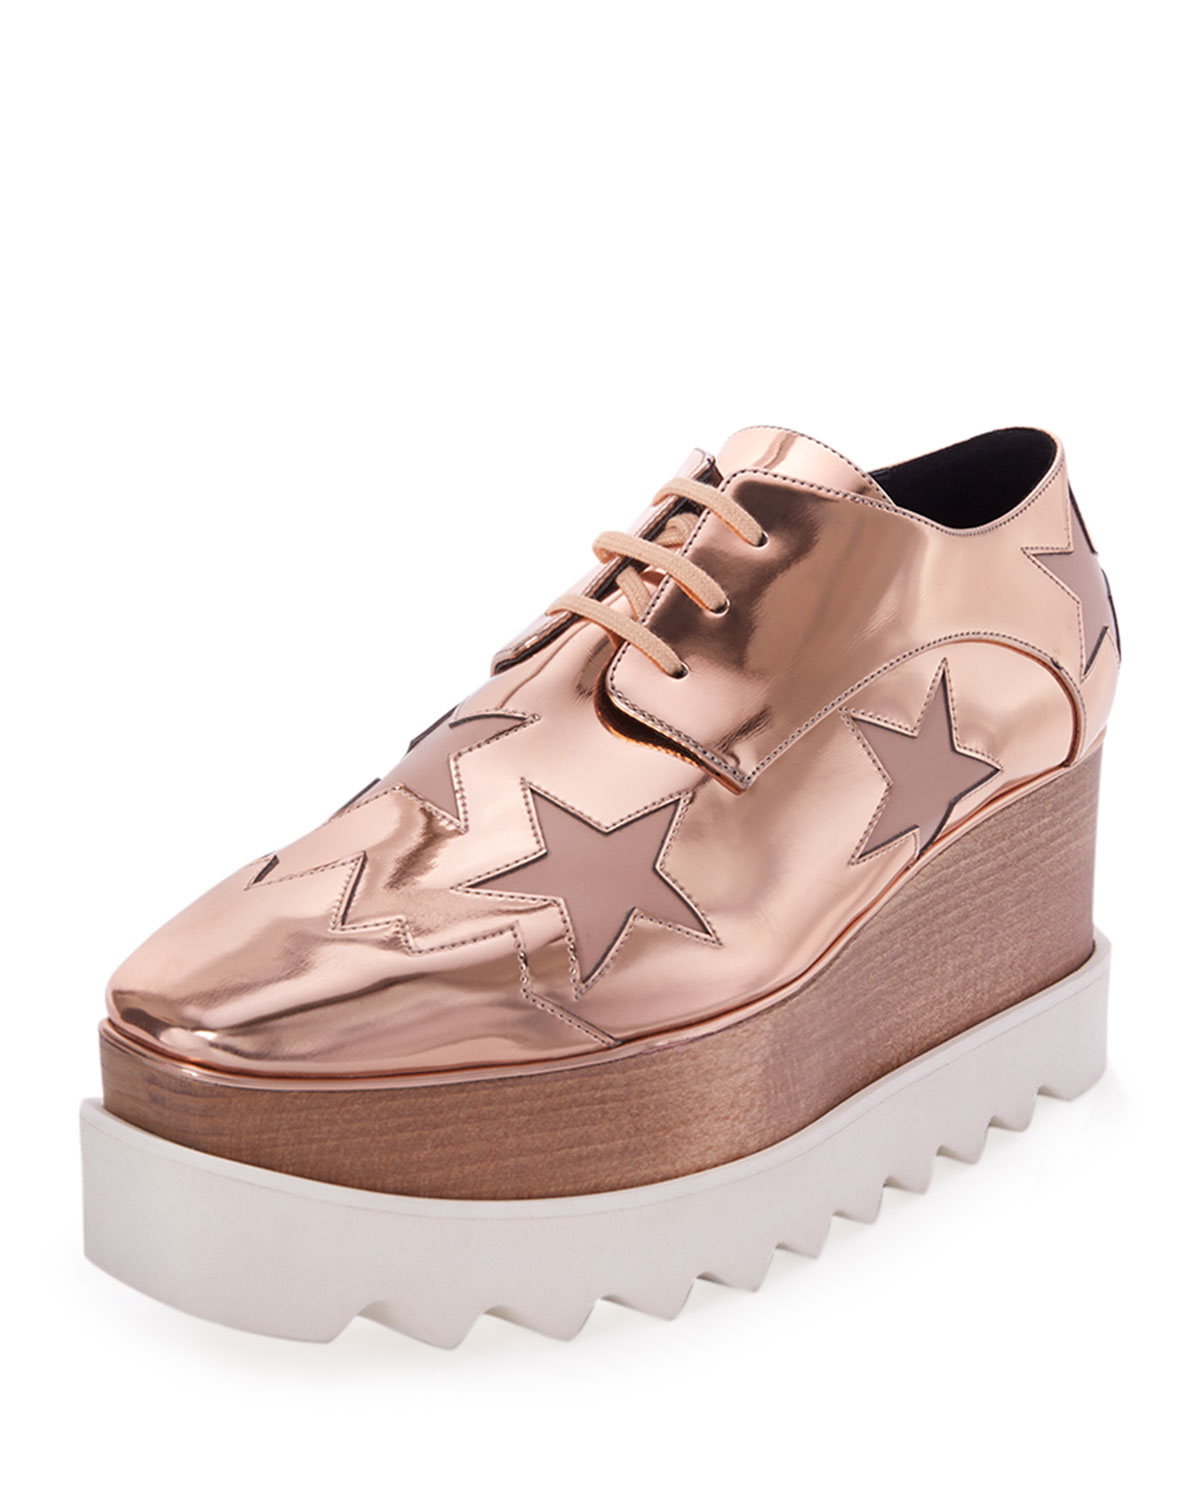 Stella mccartney Elyse Faux-Leather Platform Oxford Shoes in Gold ...